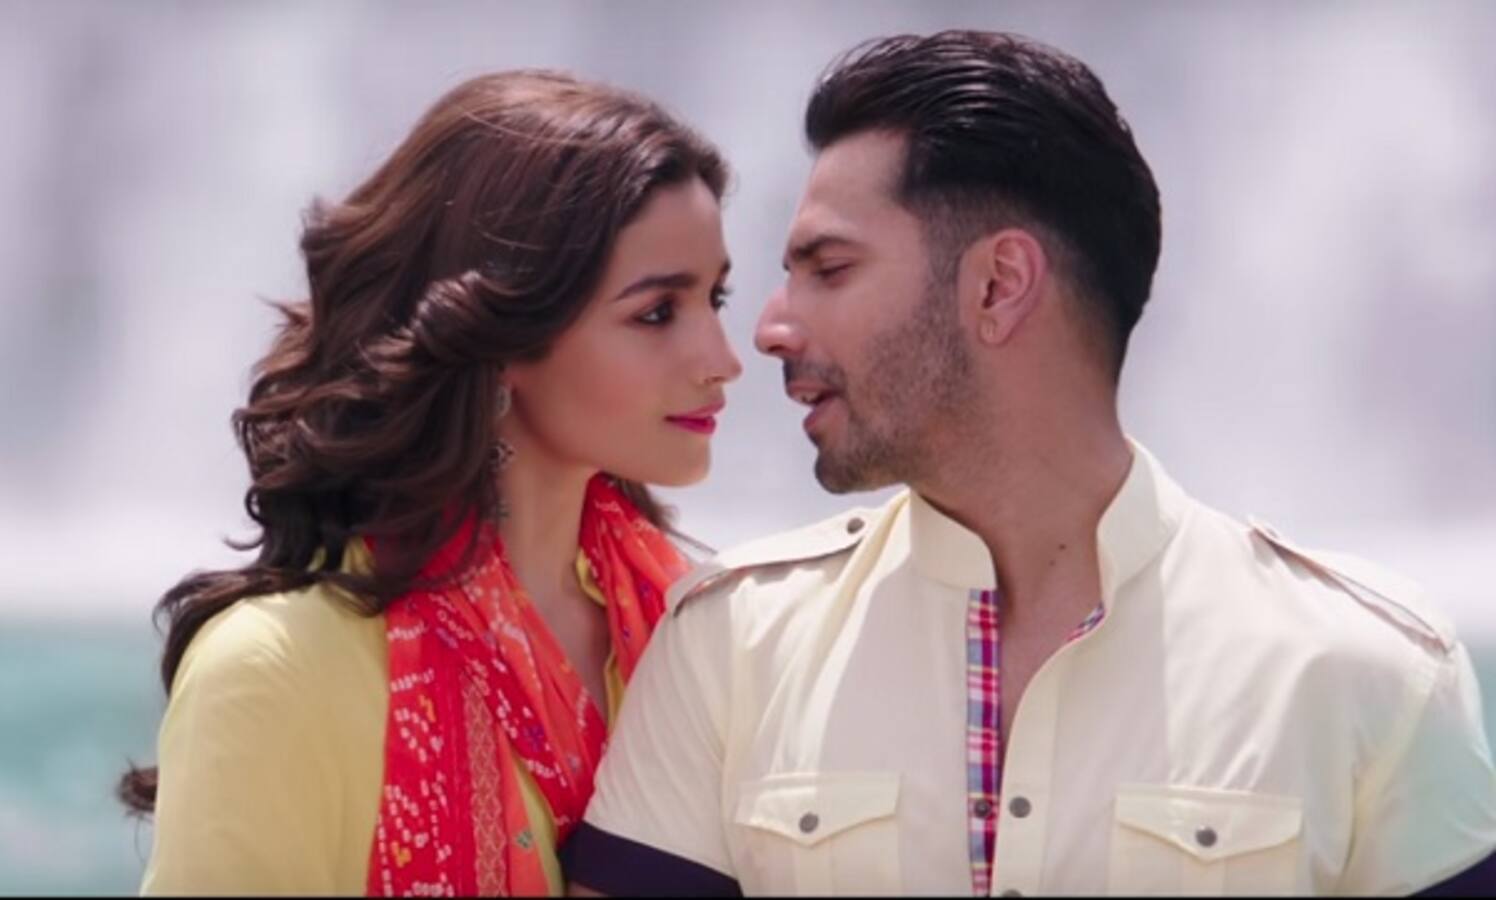 Varun Dhawan on link up rumours with Alia Bhatt: When these things come in,  it makes your work look frivolous - Bollywood News & Gossip, Movie Reviews,  Trailers & Videos at 